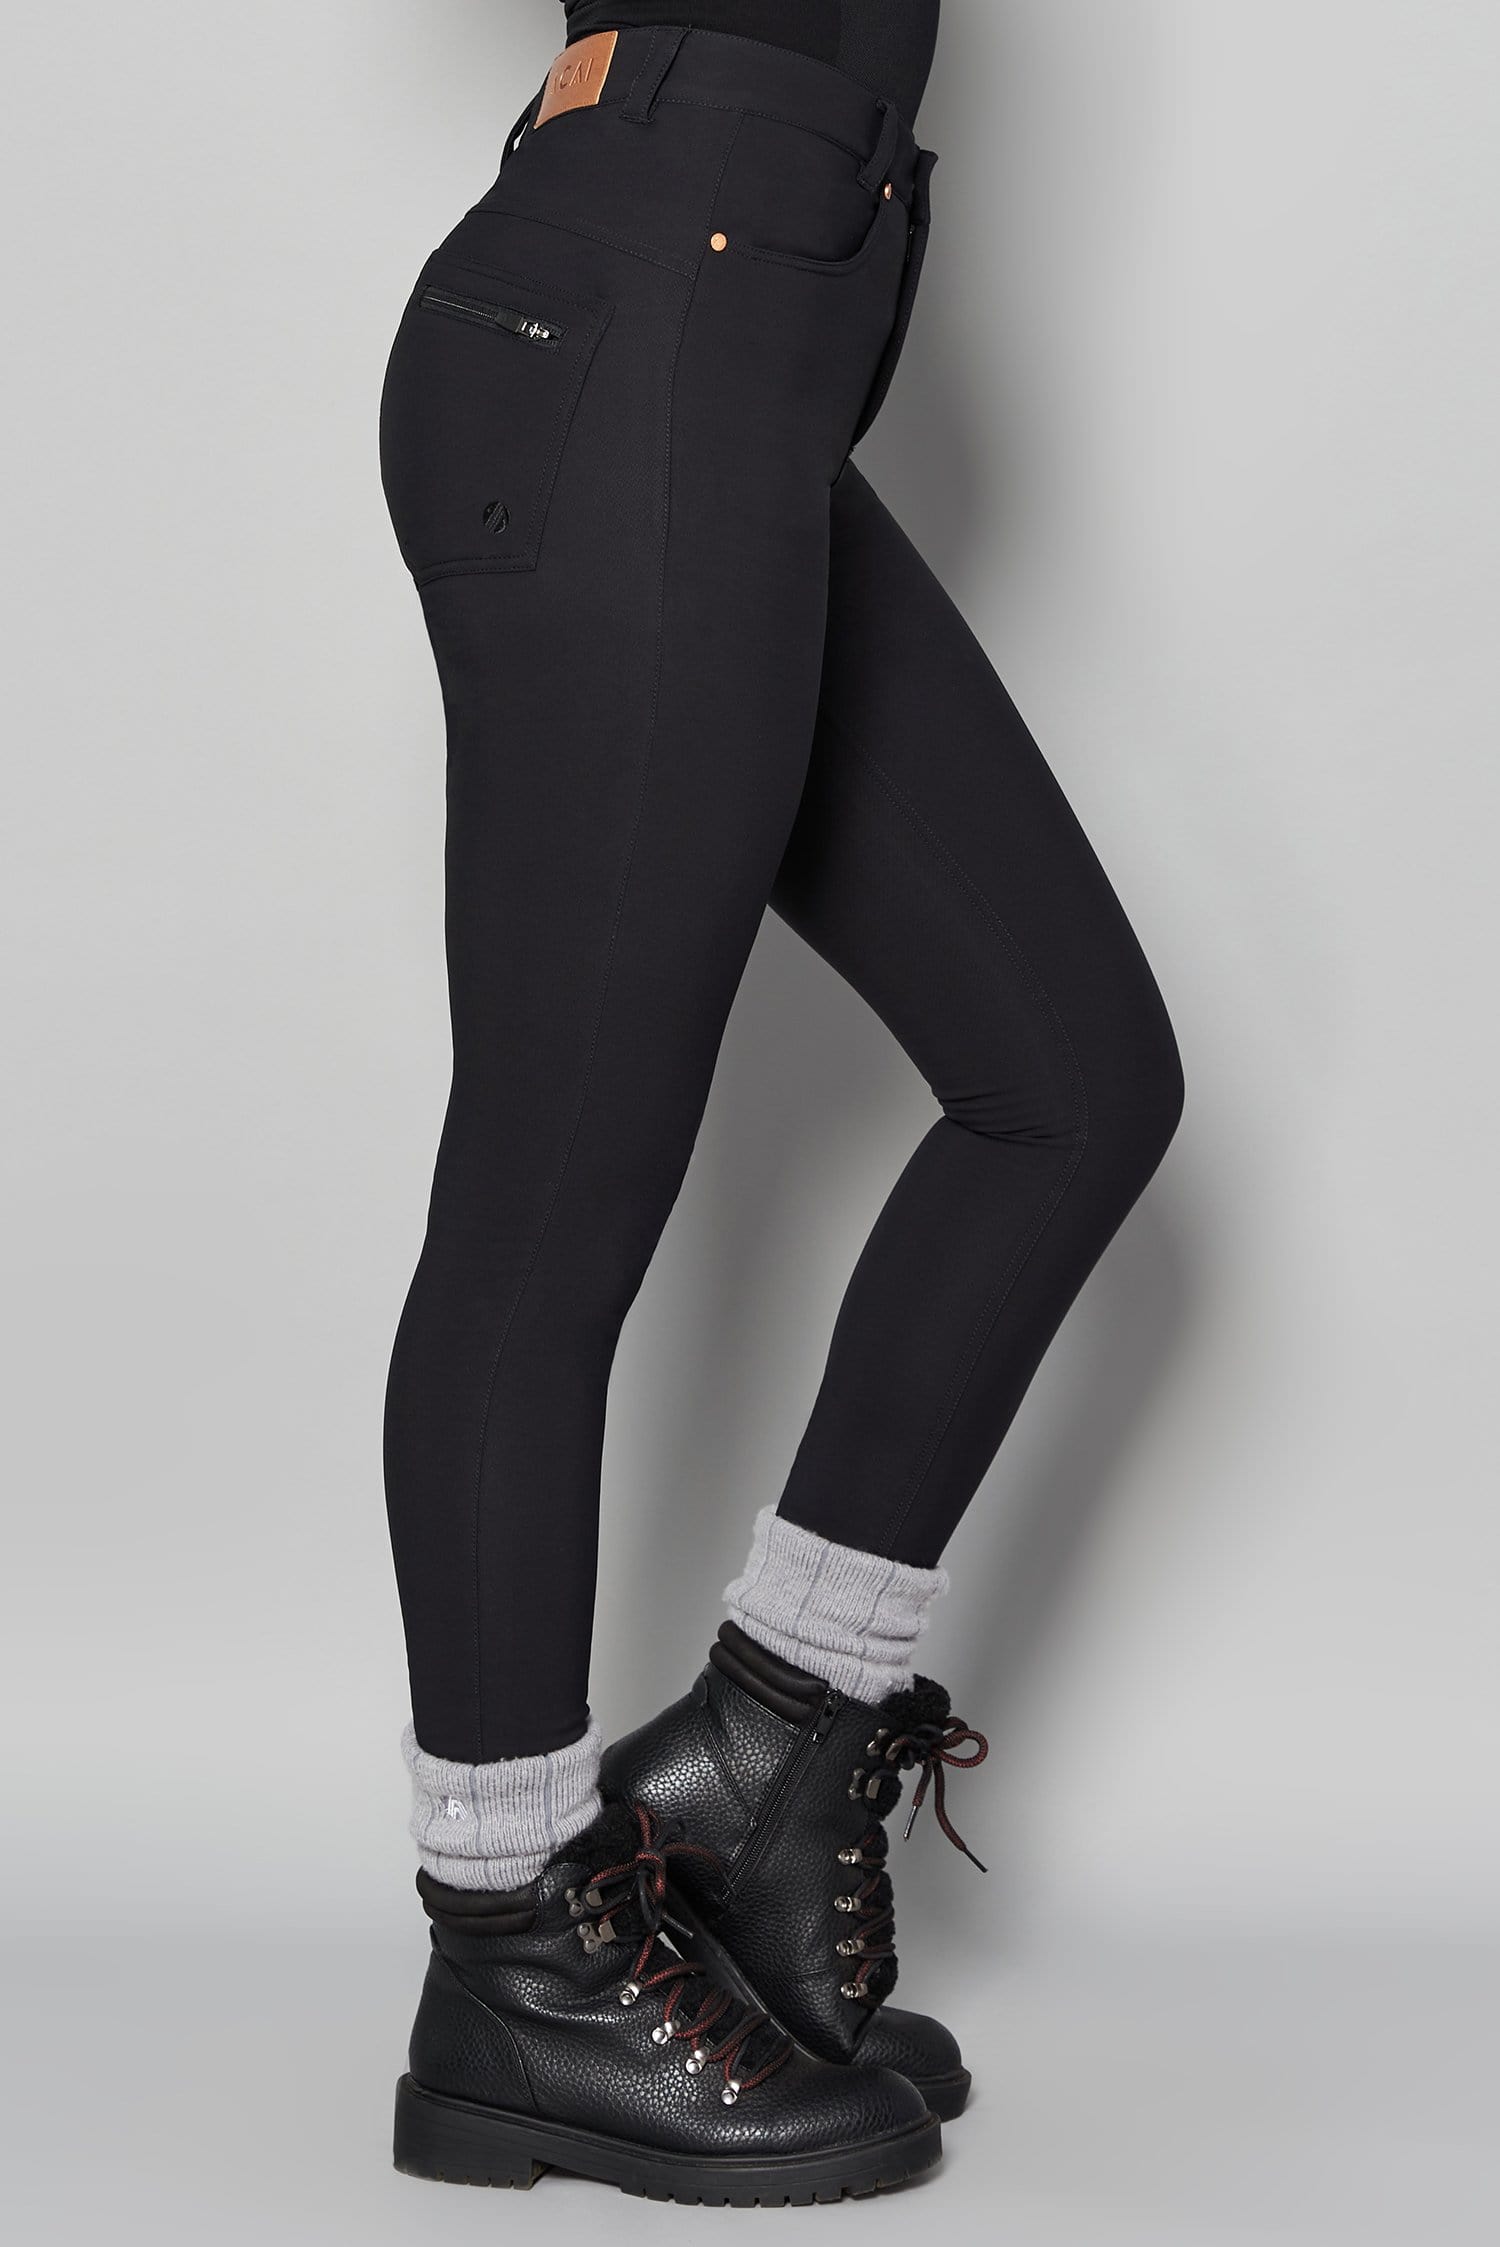 Thermal Skinny Outdoor Trousers - Black - 32r / Uk14 - Womens - Acai Outdoorwear